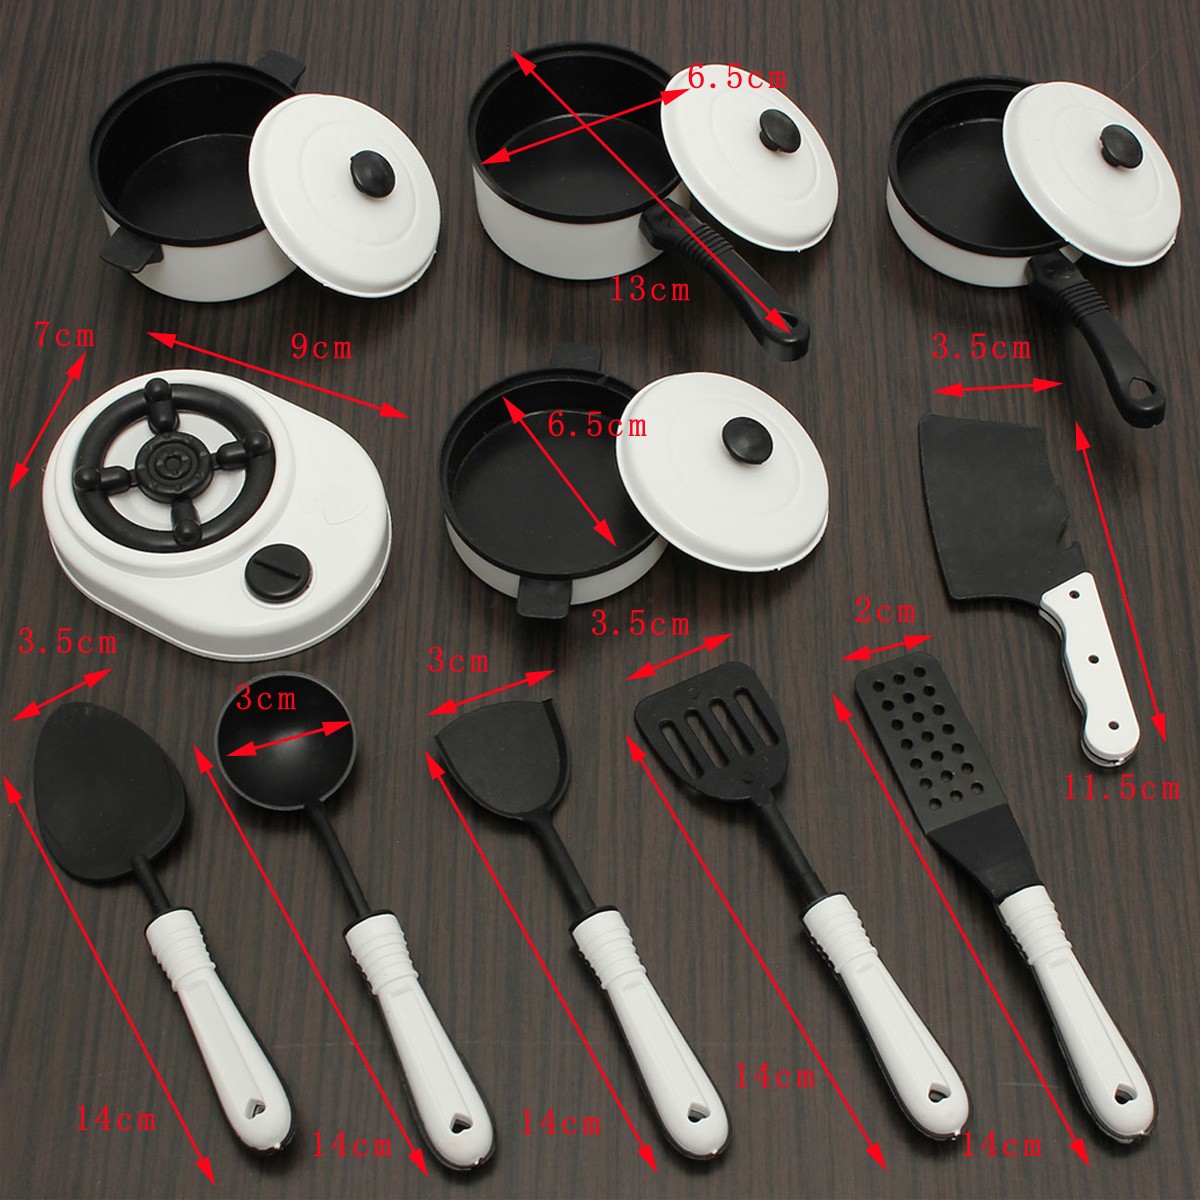 11PCS-Children-Pretended-Role-Play-Kitchen-Utensil-Accessories-Cooking-Toy-1032406